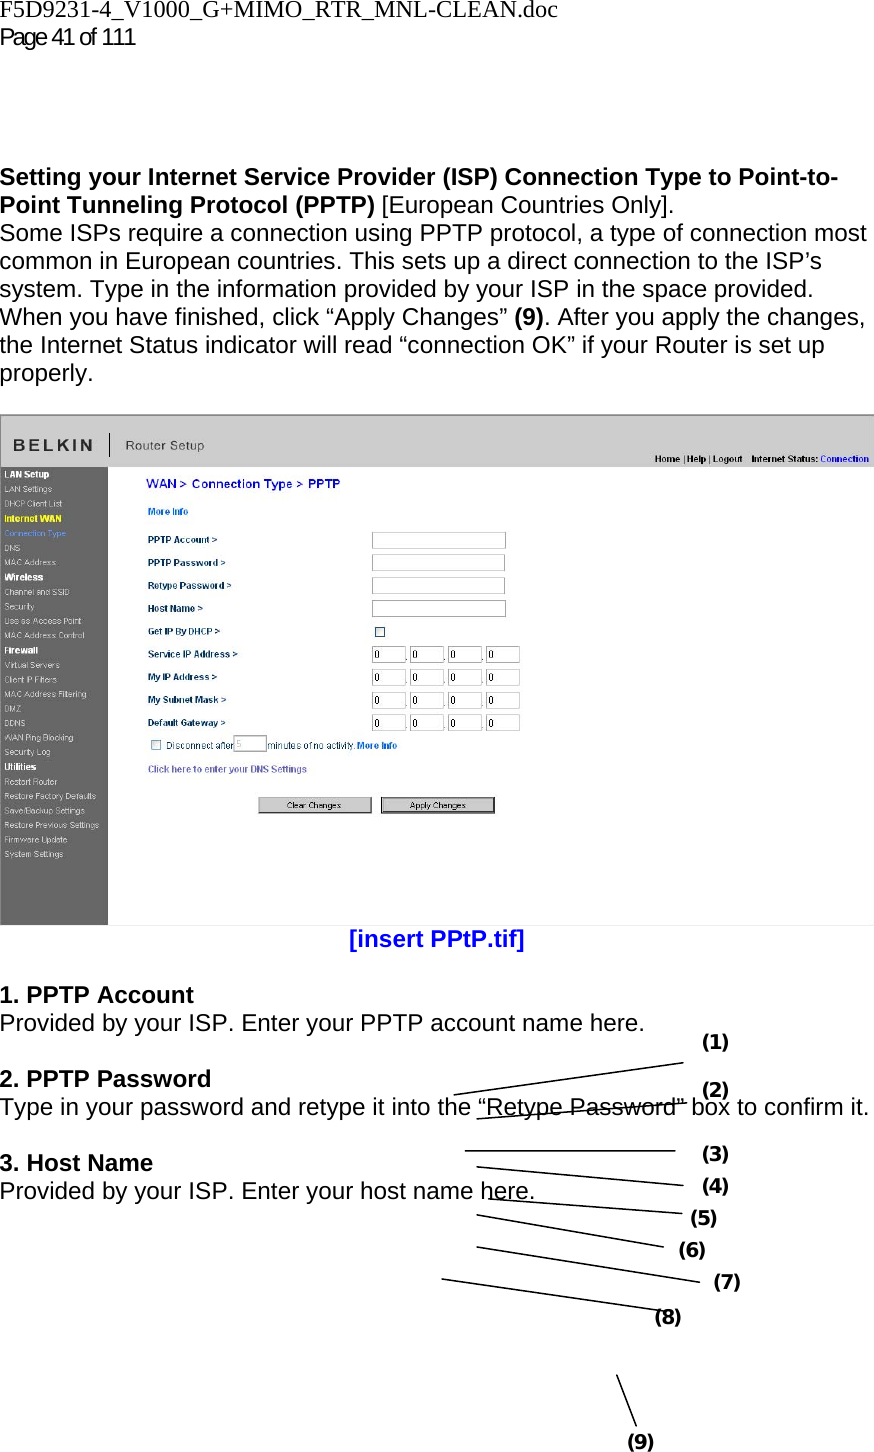 F5D9231-4_V1000_G+MIMO_RTR_MNL-CLEAN.doc  Page 41 of 111      Setting your Internet Service Provider (ISP) Connection Type to Point-to-Point Tunneling Protocol (PPTP) [European Countries Only].  Some ISPs require a connection using PPTP protocol, a type of connection most common in European countries. This sets up a direct connection to the ISP’s system. Type in the information provided by your ISP in the space provided. When you have finished, click “Apply Changes” (9). After you apply the changes, the Internet Status indicator will read “connection OK” if your Router is set up properly.   [insert PPtP.tif]  1. PPTP Account Provided by your ISP. Enter your PPTP account name here.  2. PPTP Password Type in your password and retype it into the “Retype Password” box to confirm it.  3. Host Name Provided by your ISP. Enter your host name here.(1) (2) (3) (4) (5) (6) (7) (8) (9) 